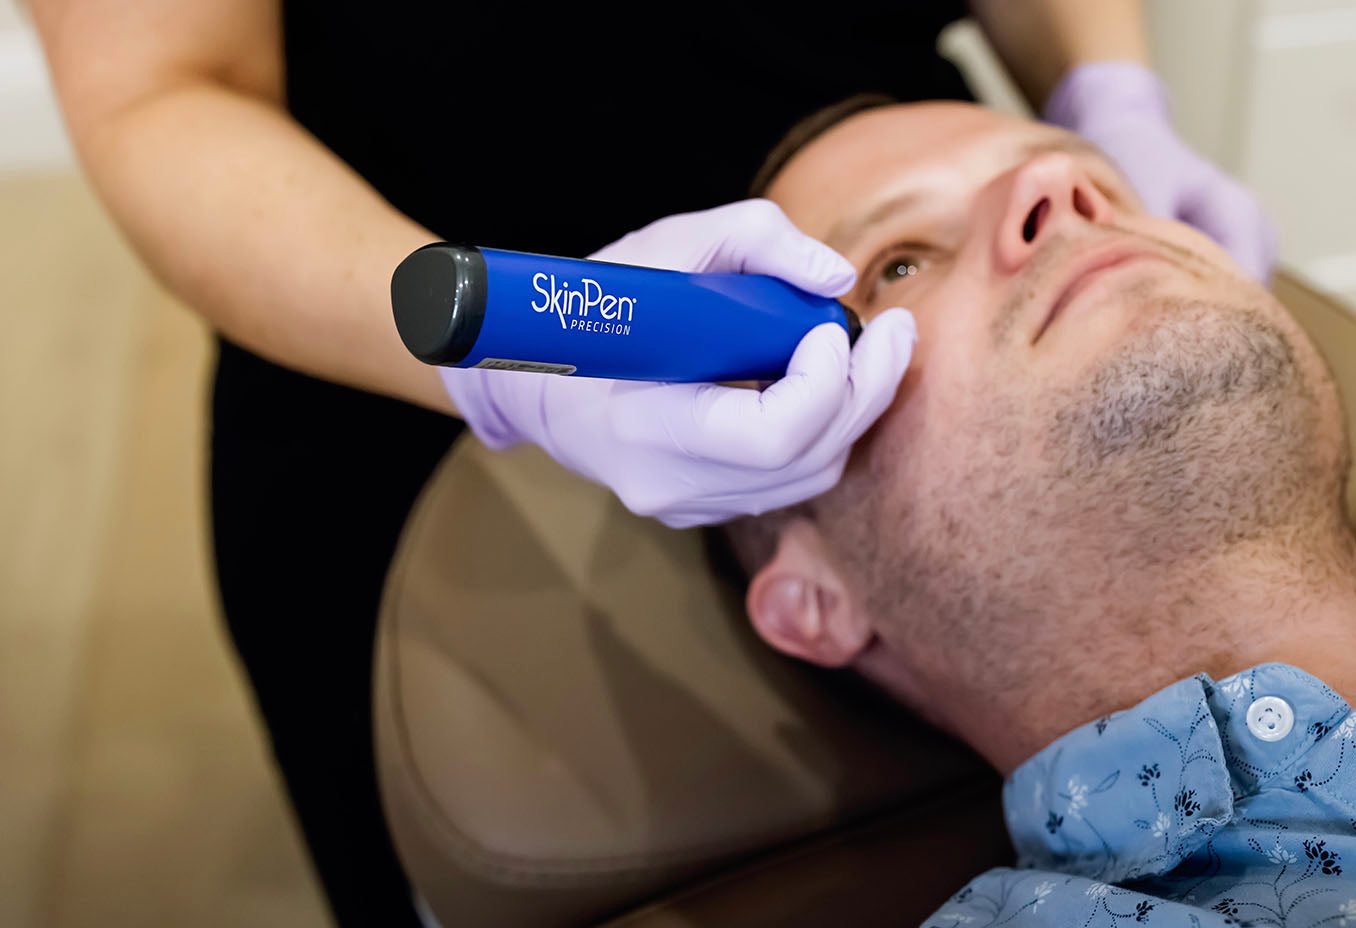 man receiving skinpen microneedling treatment performed at Skin Design Aesthetics Medical spa in South Shore, MA